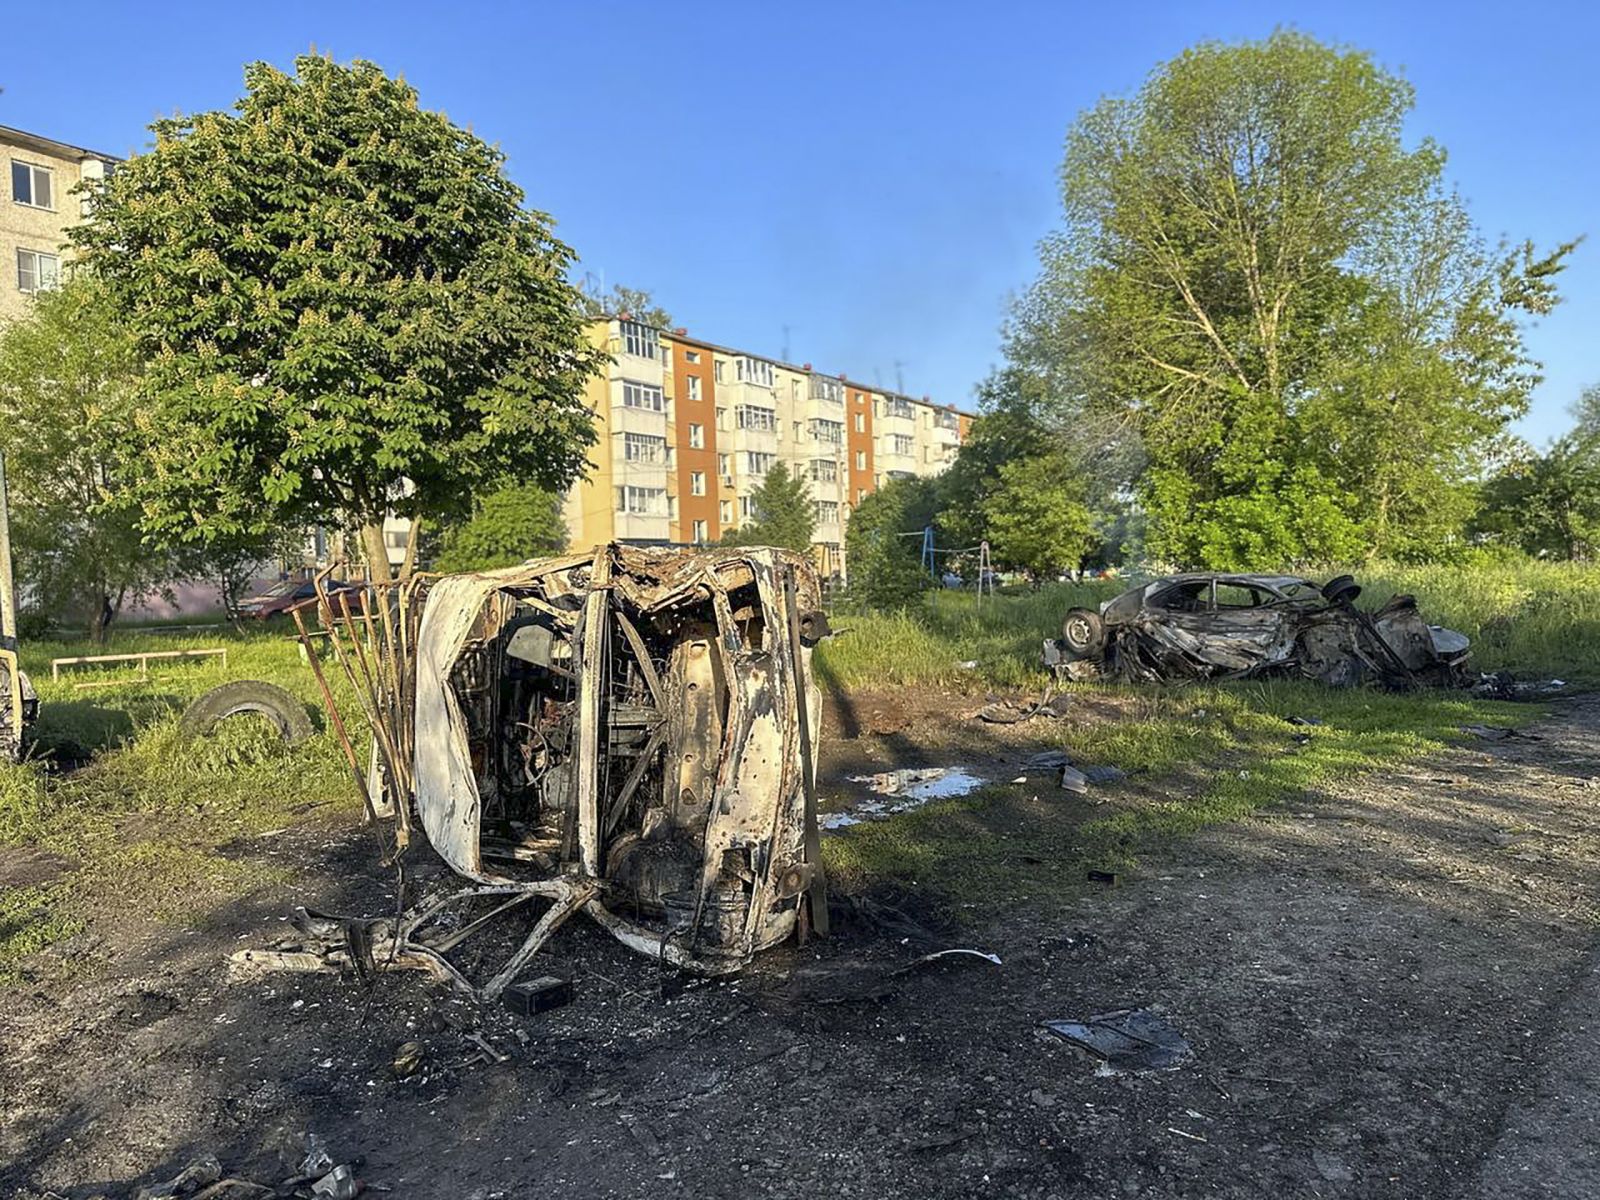 epa10664802 A handout photo made available by the Governor of Russia's Belgorod region Vyacheslav Gladkov on his Telegram channel shows the aftermath of Ukrainian shelling in the border town of Shebekino, Belgorod region, Russia, 31 May 2023. Gladkov said that the situation in Shebekino was deteriorating. Evacuation of children from the Shebekinsky and Grayvoronsky districts of the Belgorod region was set to begin on 31 May. The first group of 300 people will be sent to the city of Voronezh, the governor added.  EPA/GOVERNOR OF BELGOROD REGION/HANDOUT HANDOUT HANDOUT EDITORIAL USE ONLY/NO SALES HANDOUT EDITORIAL USE ONLY/NO SALES